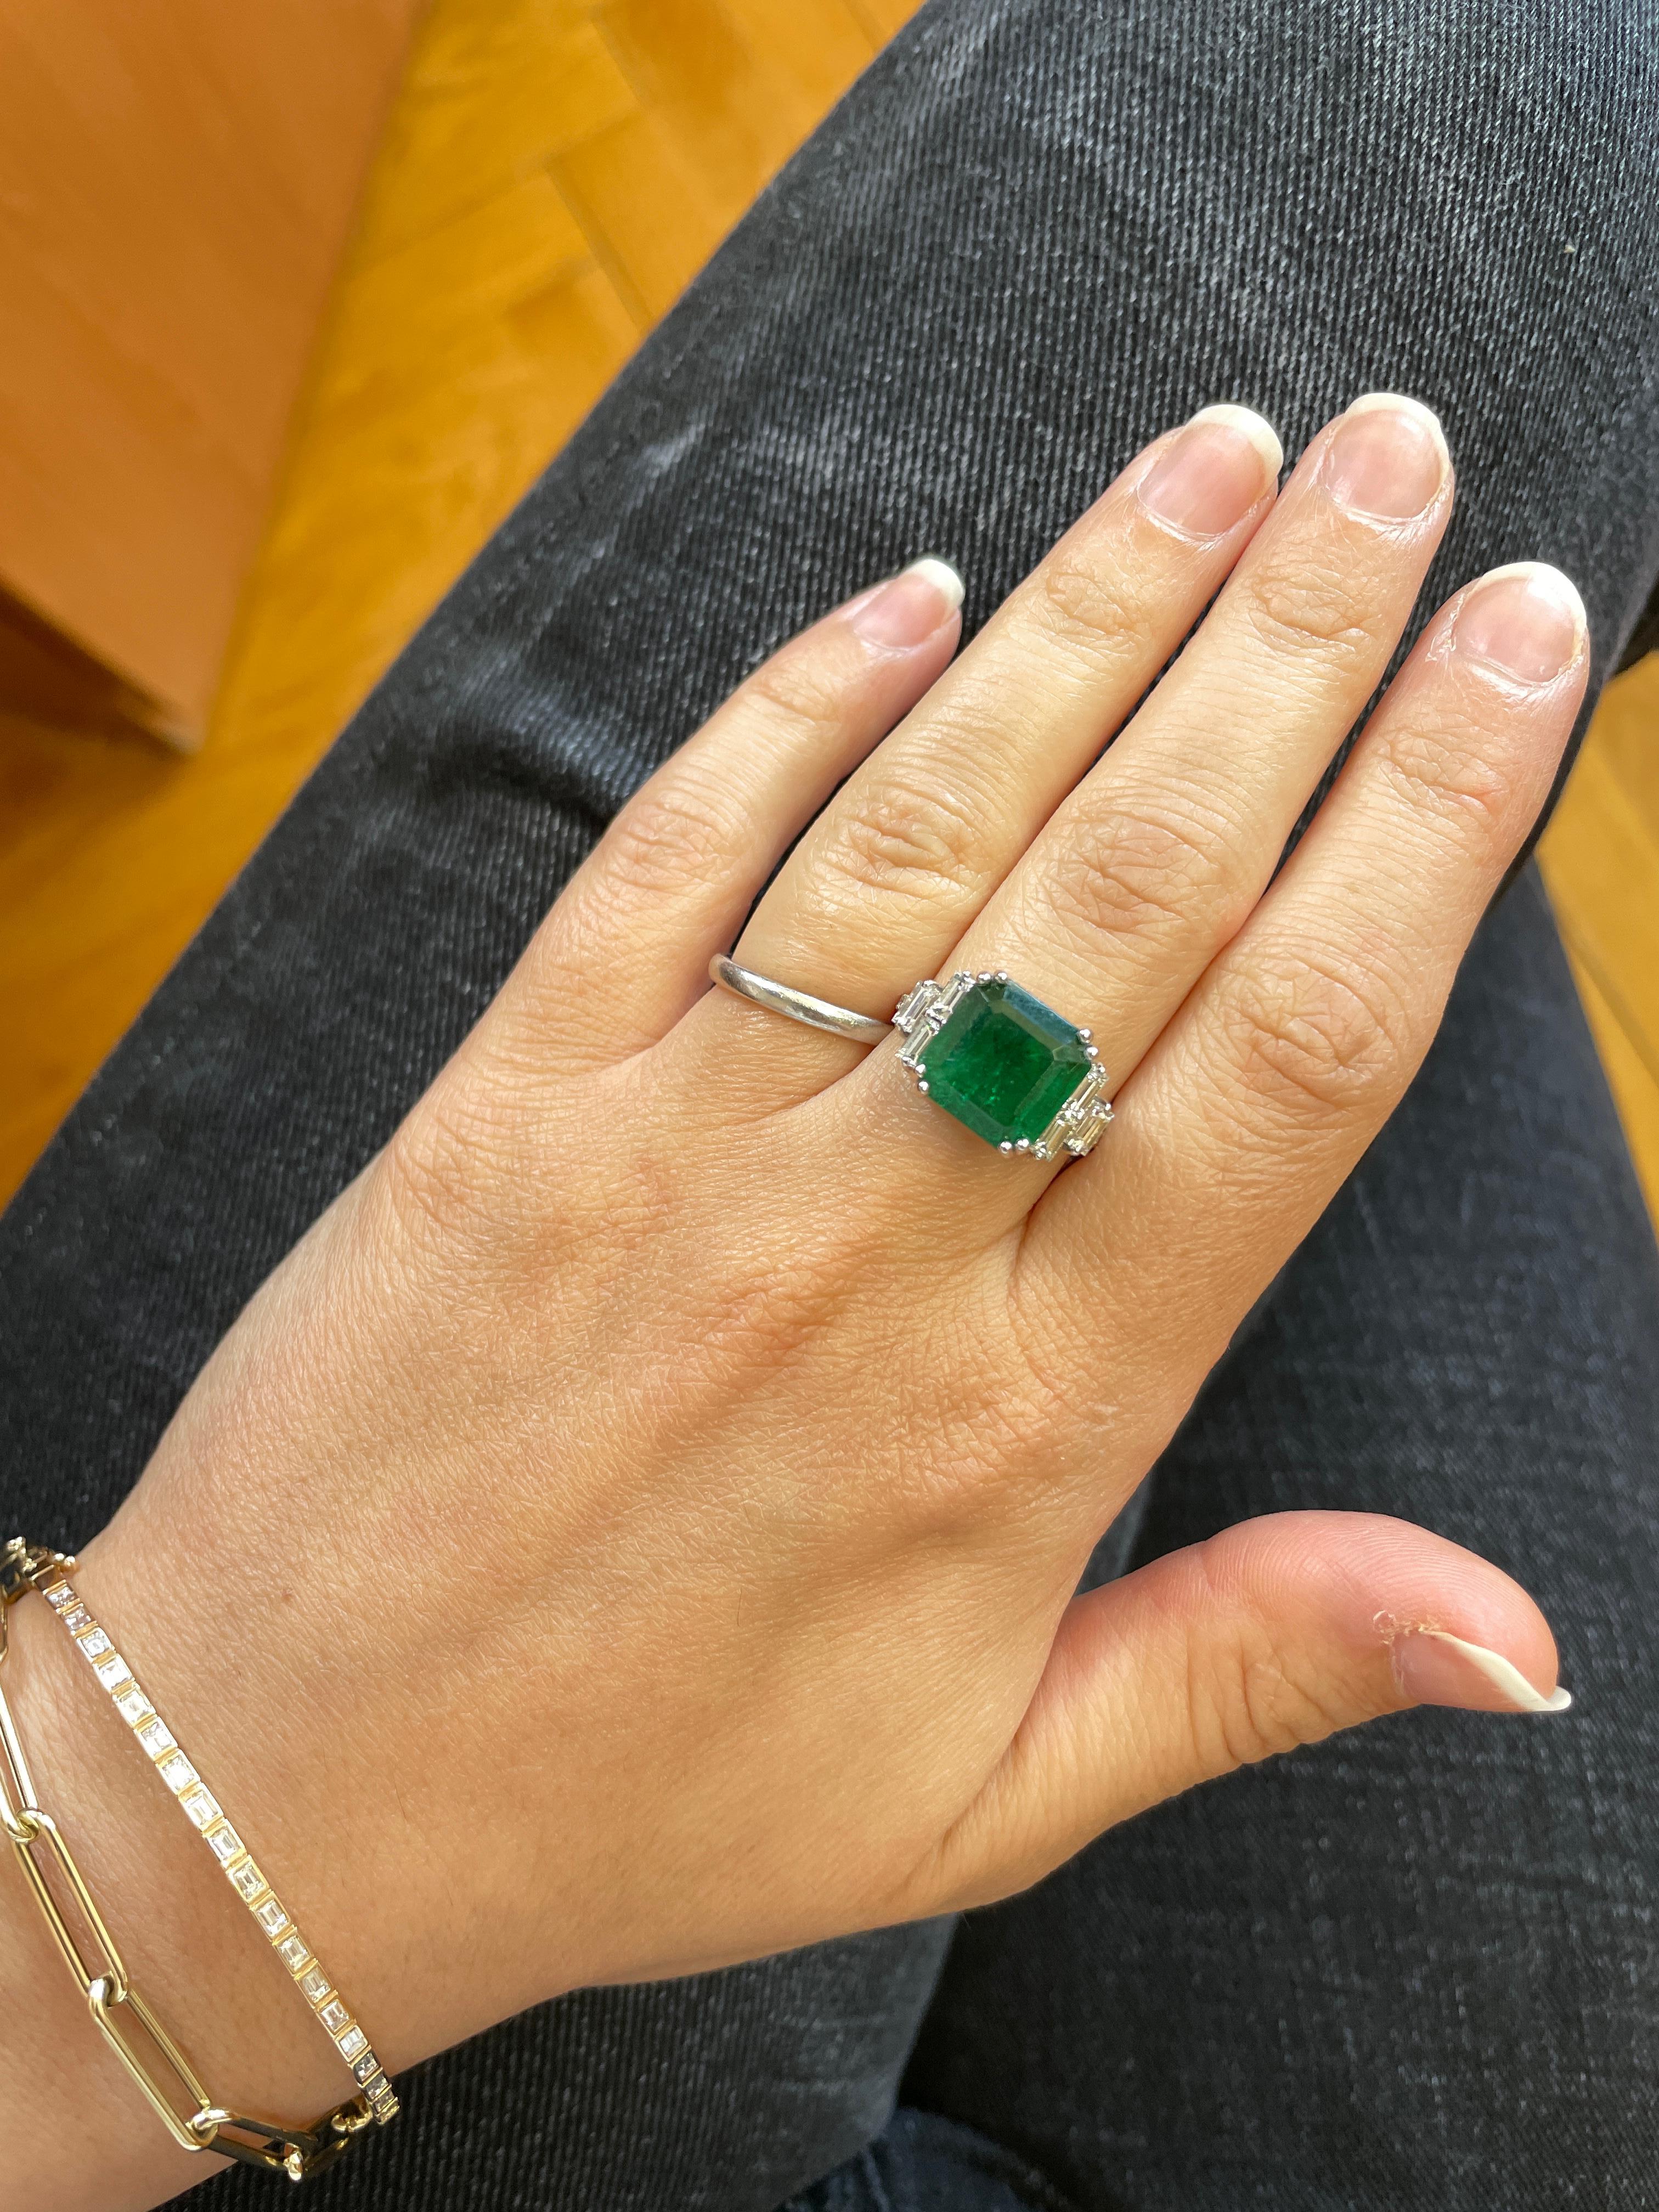 Material: 18K White Gold
Center Stone Details: 1 Emerald Cut Emerald at 5.40 Carats - Measuring 10.6 x 10.5 x 7.2 millimeters
Side Stone Details: 12 Round Brilliant White Diamonds at 0.15 Carats Total Weight Color: H-I / Clarity: SI
6 White Baguette